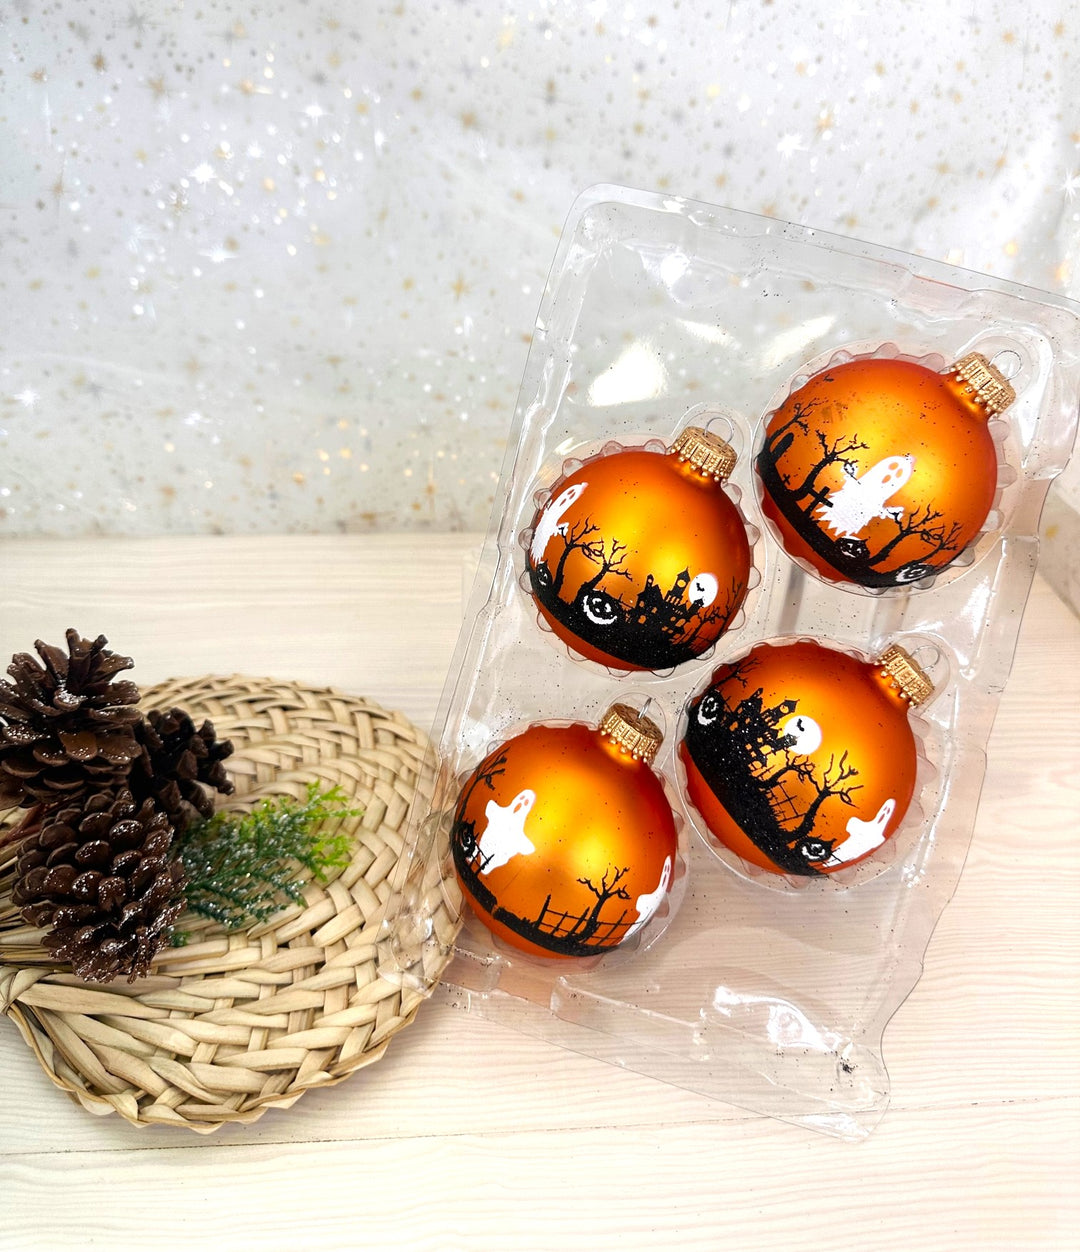 Halloween Tree Ornaments - 67mm/2.625" Decorated Glass Balls from Christmas by Krebs - Handmade Seamless Hanging Holiday Decorations for Trees - Set of 8 (Halloween Graveyard and Mummy)